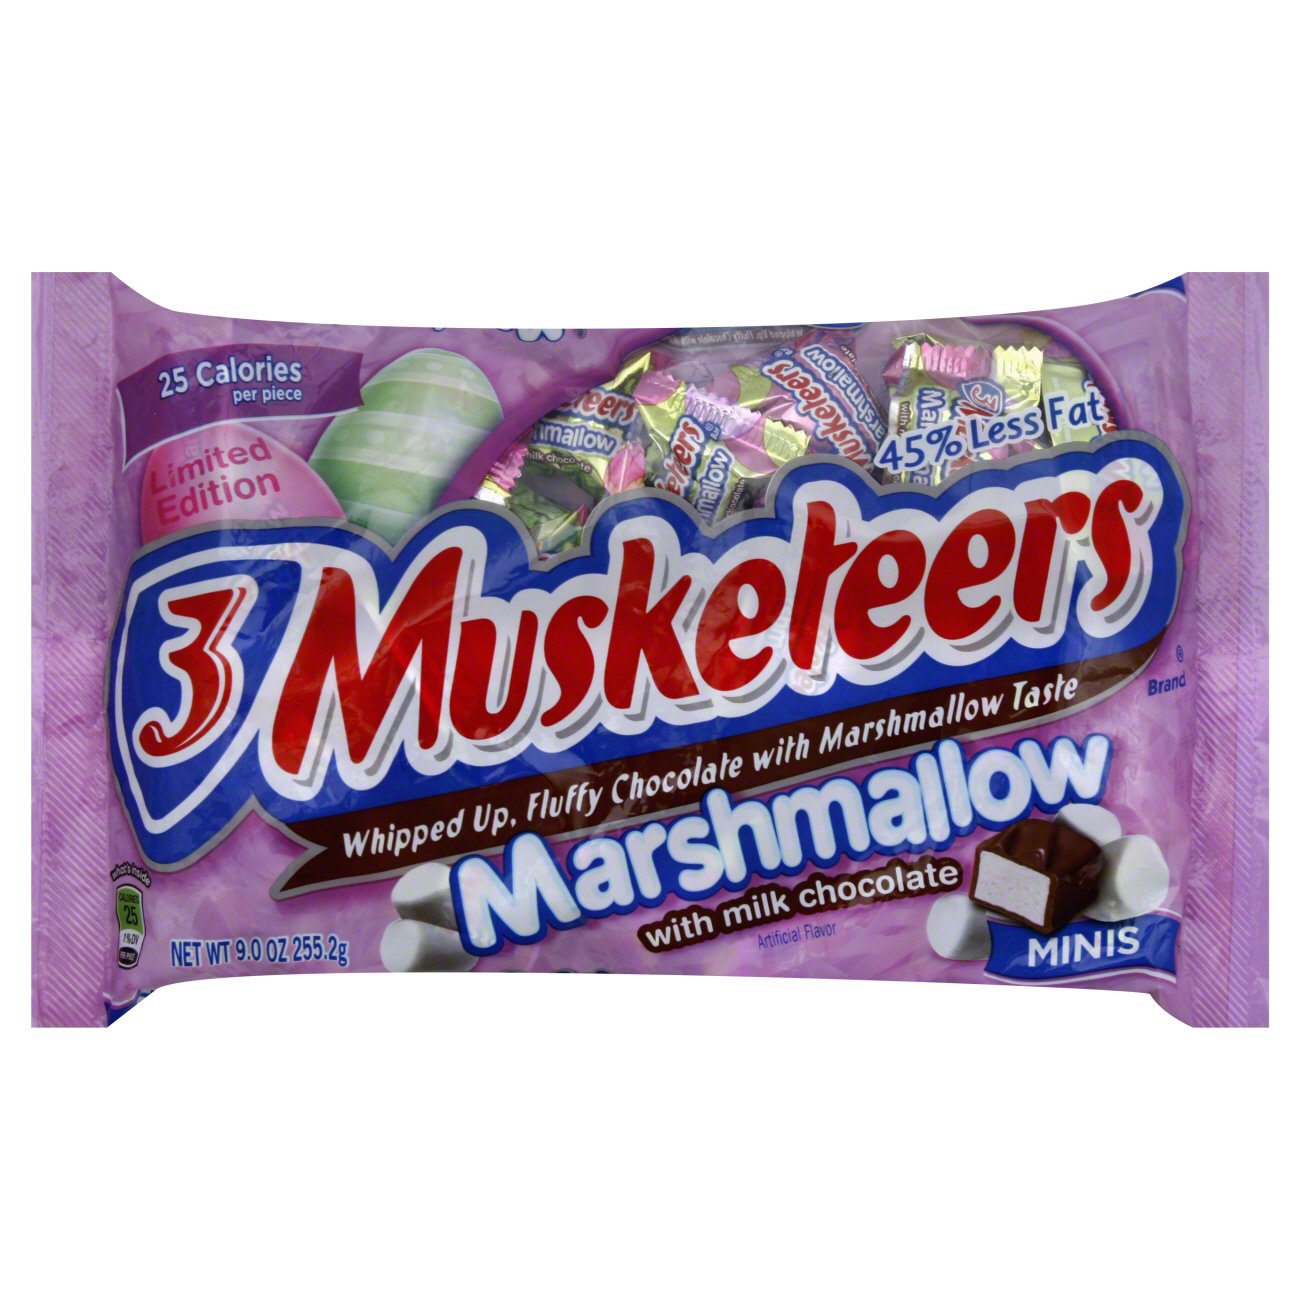 3 Musketeers Marshmallow Minis With Milk Chocolate - Shop at H-E-B